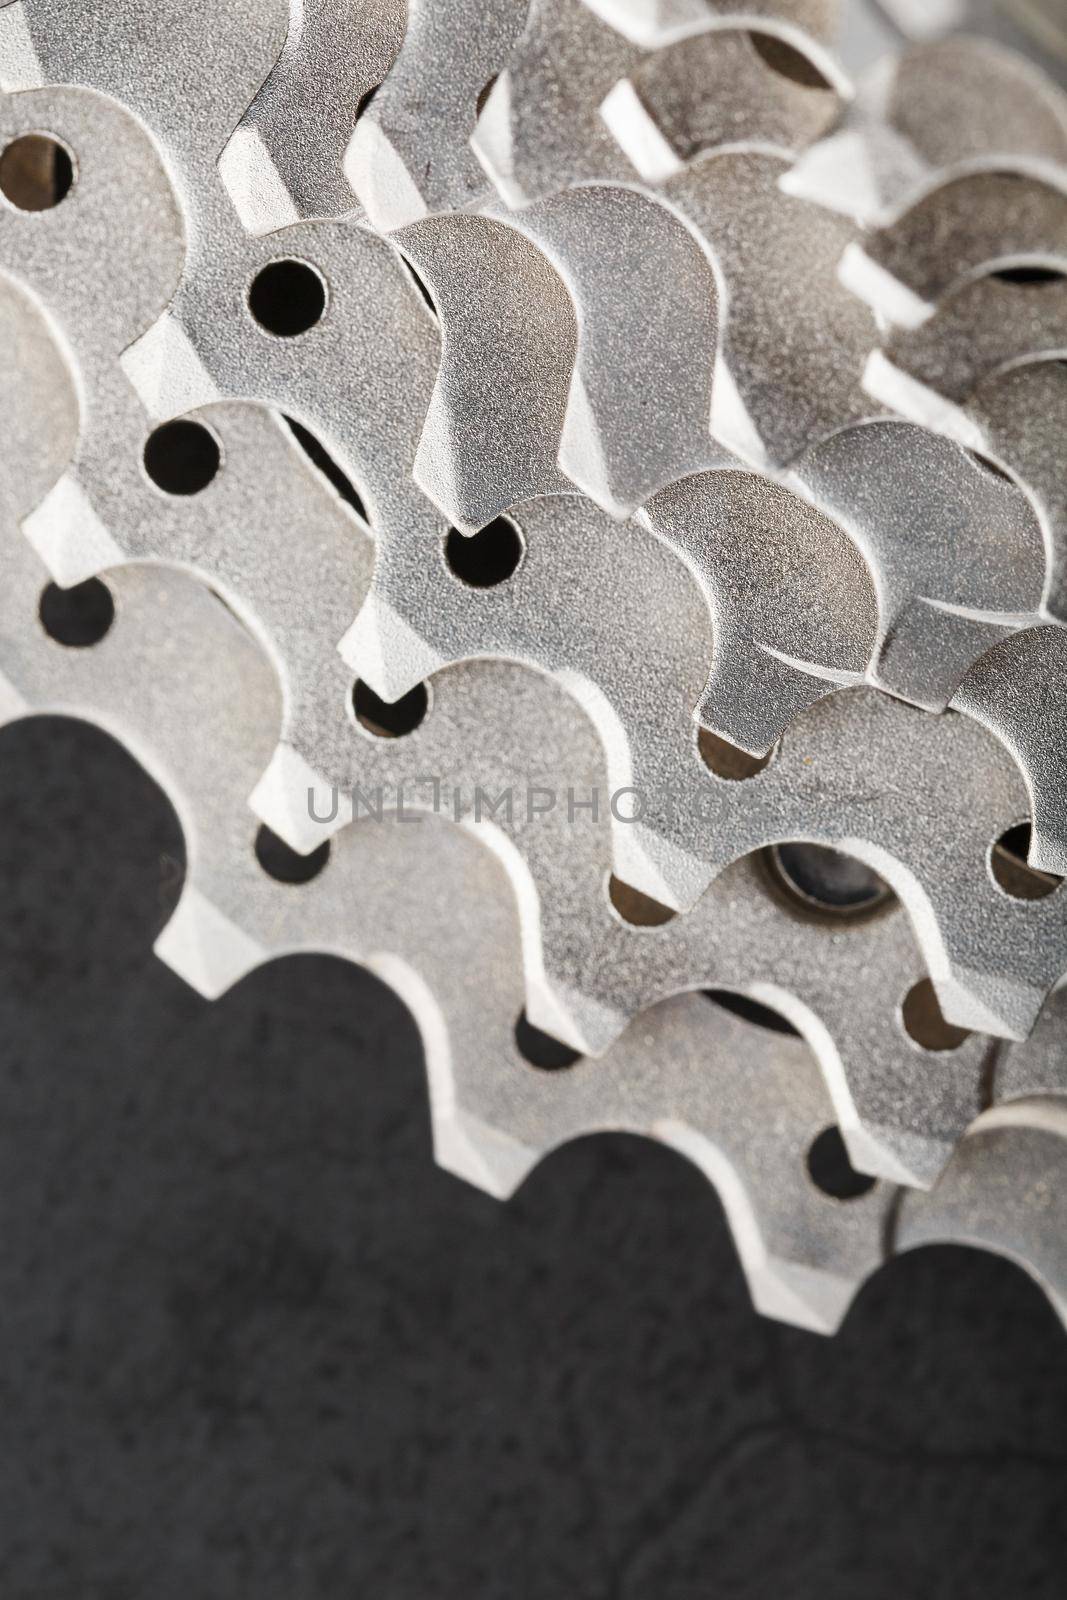 Bicycle stars from a bicycle chain drive mechanism by AlexGrec